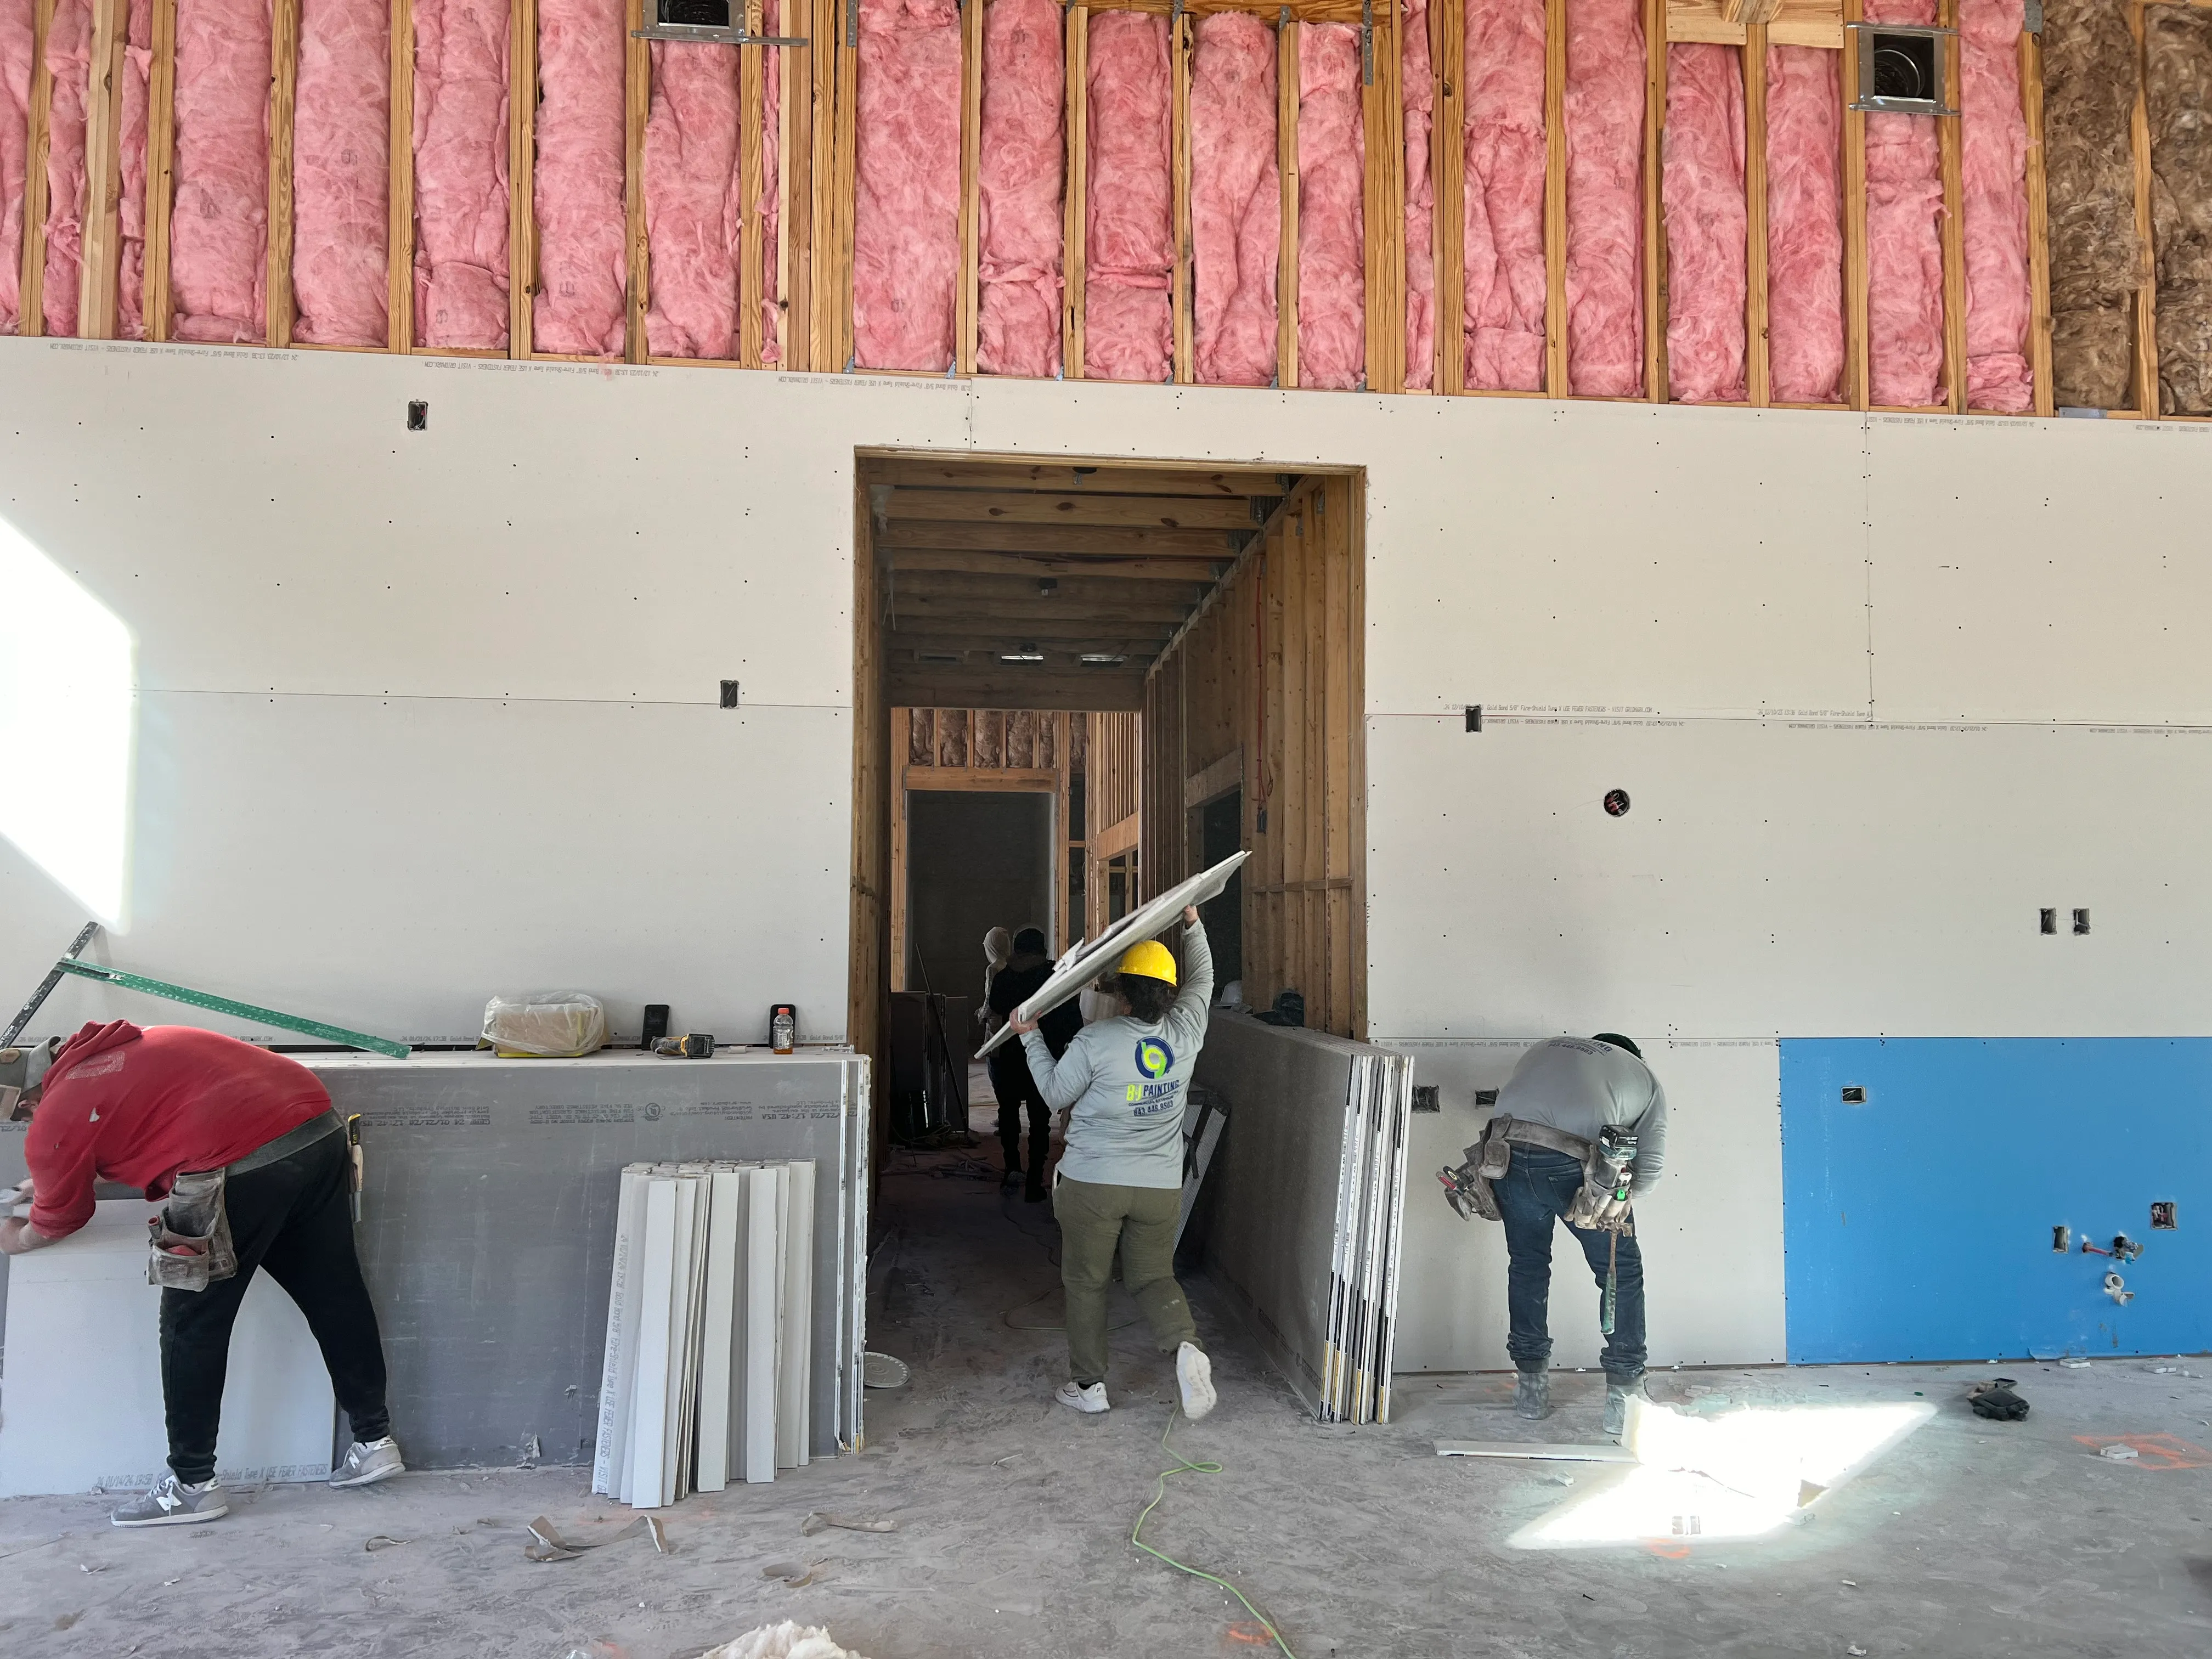 Drywall and Plastering for B&J Painting LLC in Myrtle Beach, SC